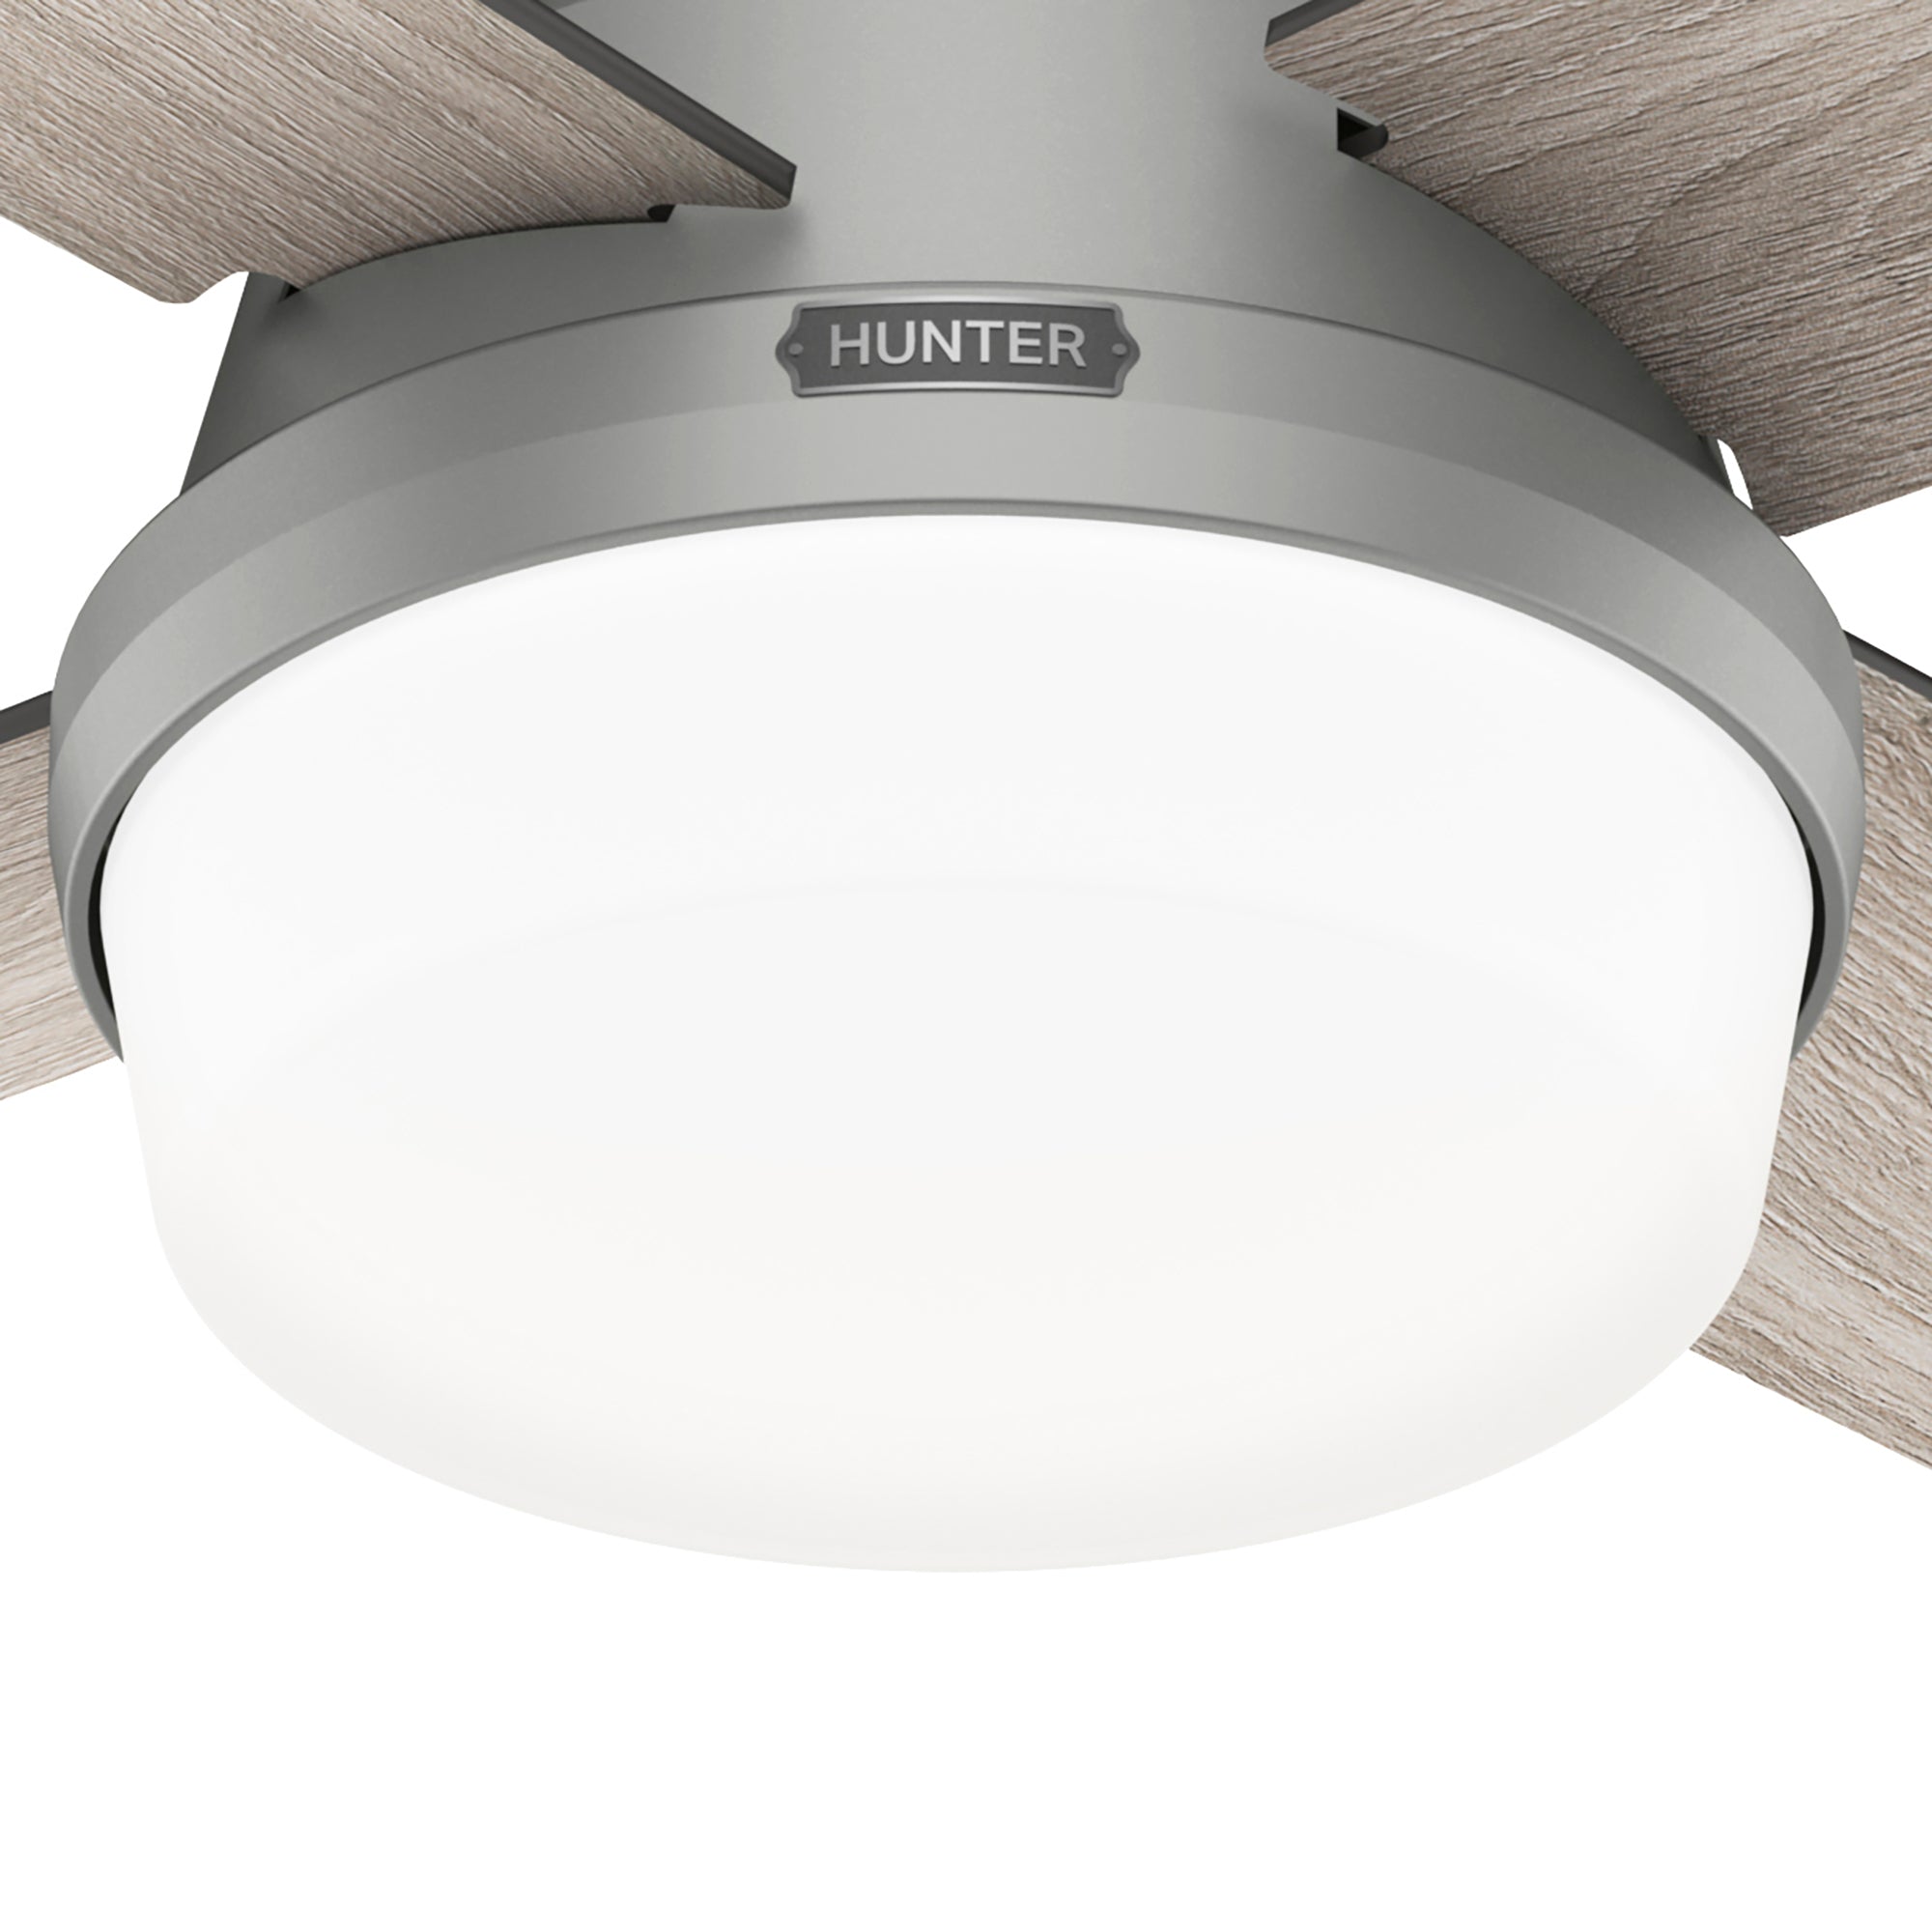 Hunter 44 inch Dempsey Low Profile Ceiling Fan with LED Light Kit and Handheld Remote Ceiling Fan Hunter Matte Silver Light Gray Oak / Greyed Walnut Painted Cased White